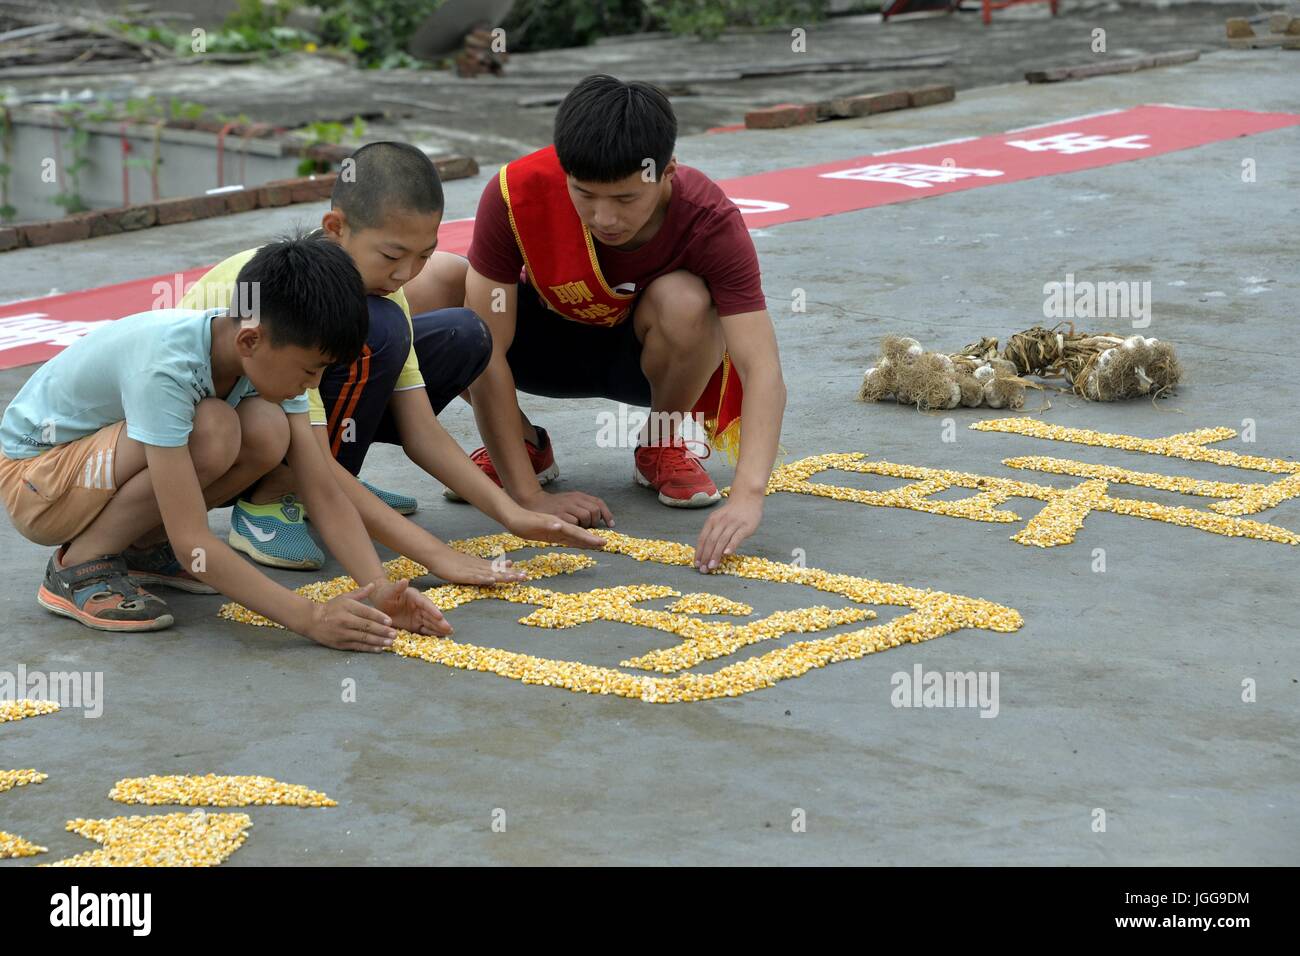 Liaocheng, Liaocheng, China. 6th July, 2017. Liaocheng, CHINA-July 6 2017: (EDITORIAL USE ONLY. CHINA OUT) Villagers and volunteers form eight Chinese characters saying 'Never Forget History, Reinvigorate the Country' with corns in Liaocheng, east China's Shandong Province, July 6th, 2017, marking the 80th anniversary of the July 7th 1937 Incident. July 7 marks the 80th anniversary of the Marco Polo Bridge Incident, which triggered the Chinese People's War of Resistance Against Japanese Aggression (1937-45) across the country. Credit: SIPA Asia/ZUMA Wire/Alamy Live News Stock Photo